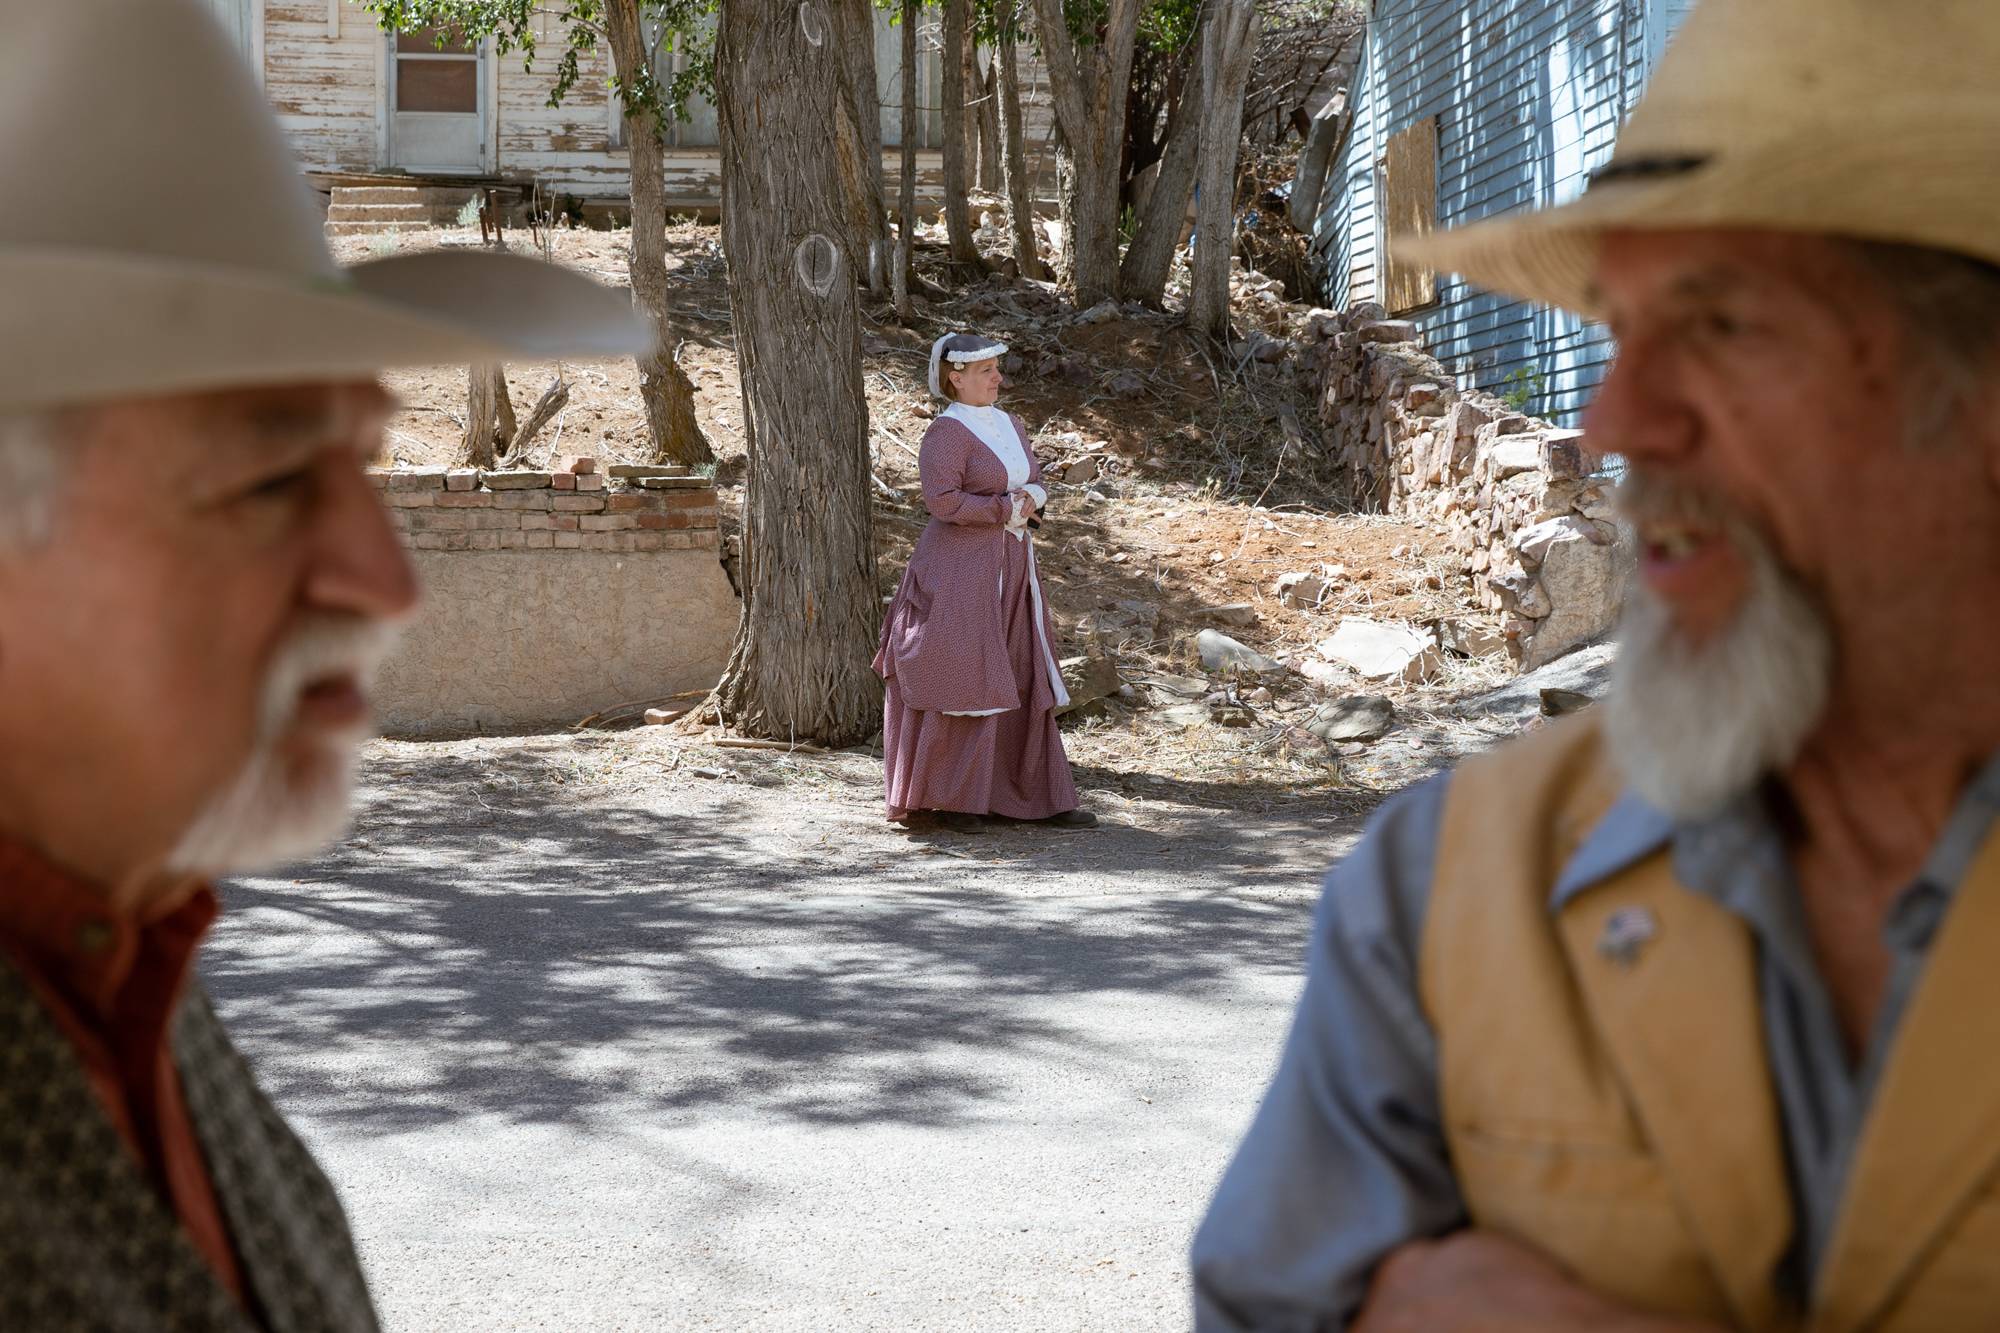 Sharron Faehling, background, Tim Umina, left, and Bill Merfy, right, wait outside of Christ Episcopal Church during filming an 1800s western documentary on Friday, June 24, 2022, in Pioche, Nevada.